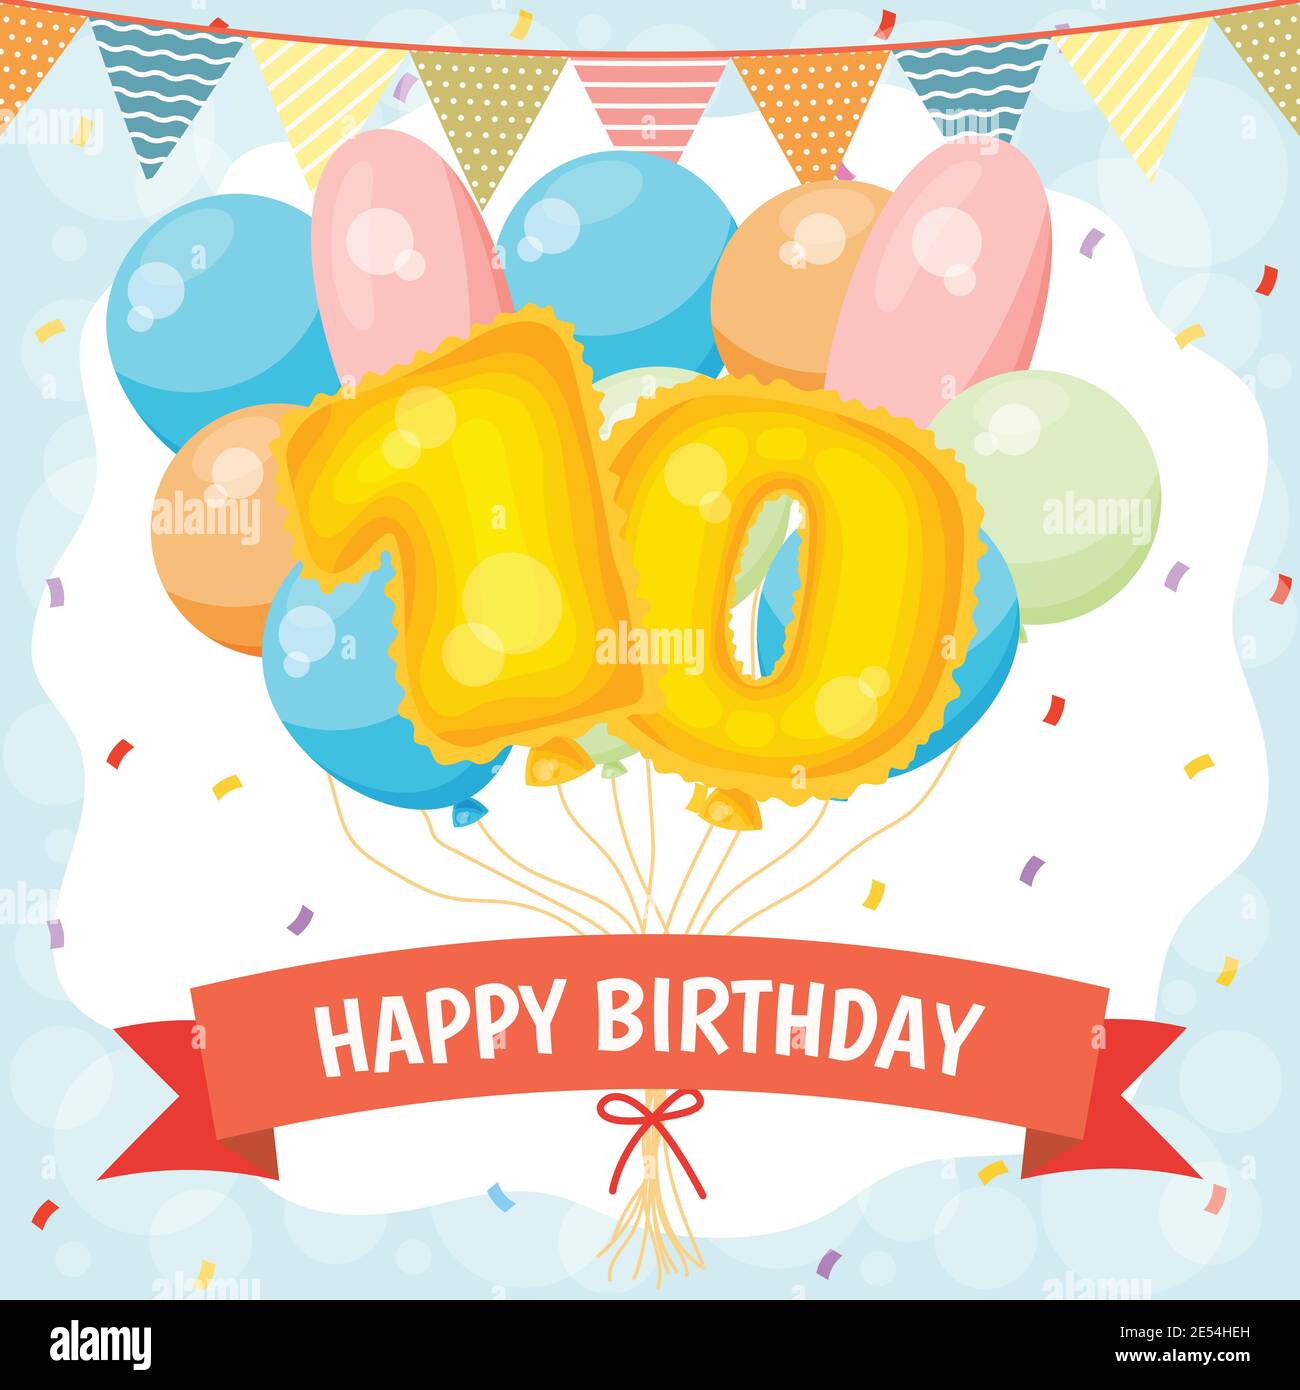 Happy Birthday Greeting Card With Big Foil Number Balloon, Colorful 